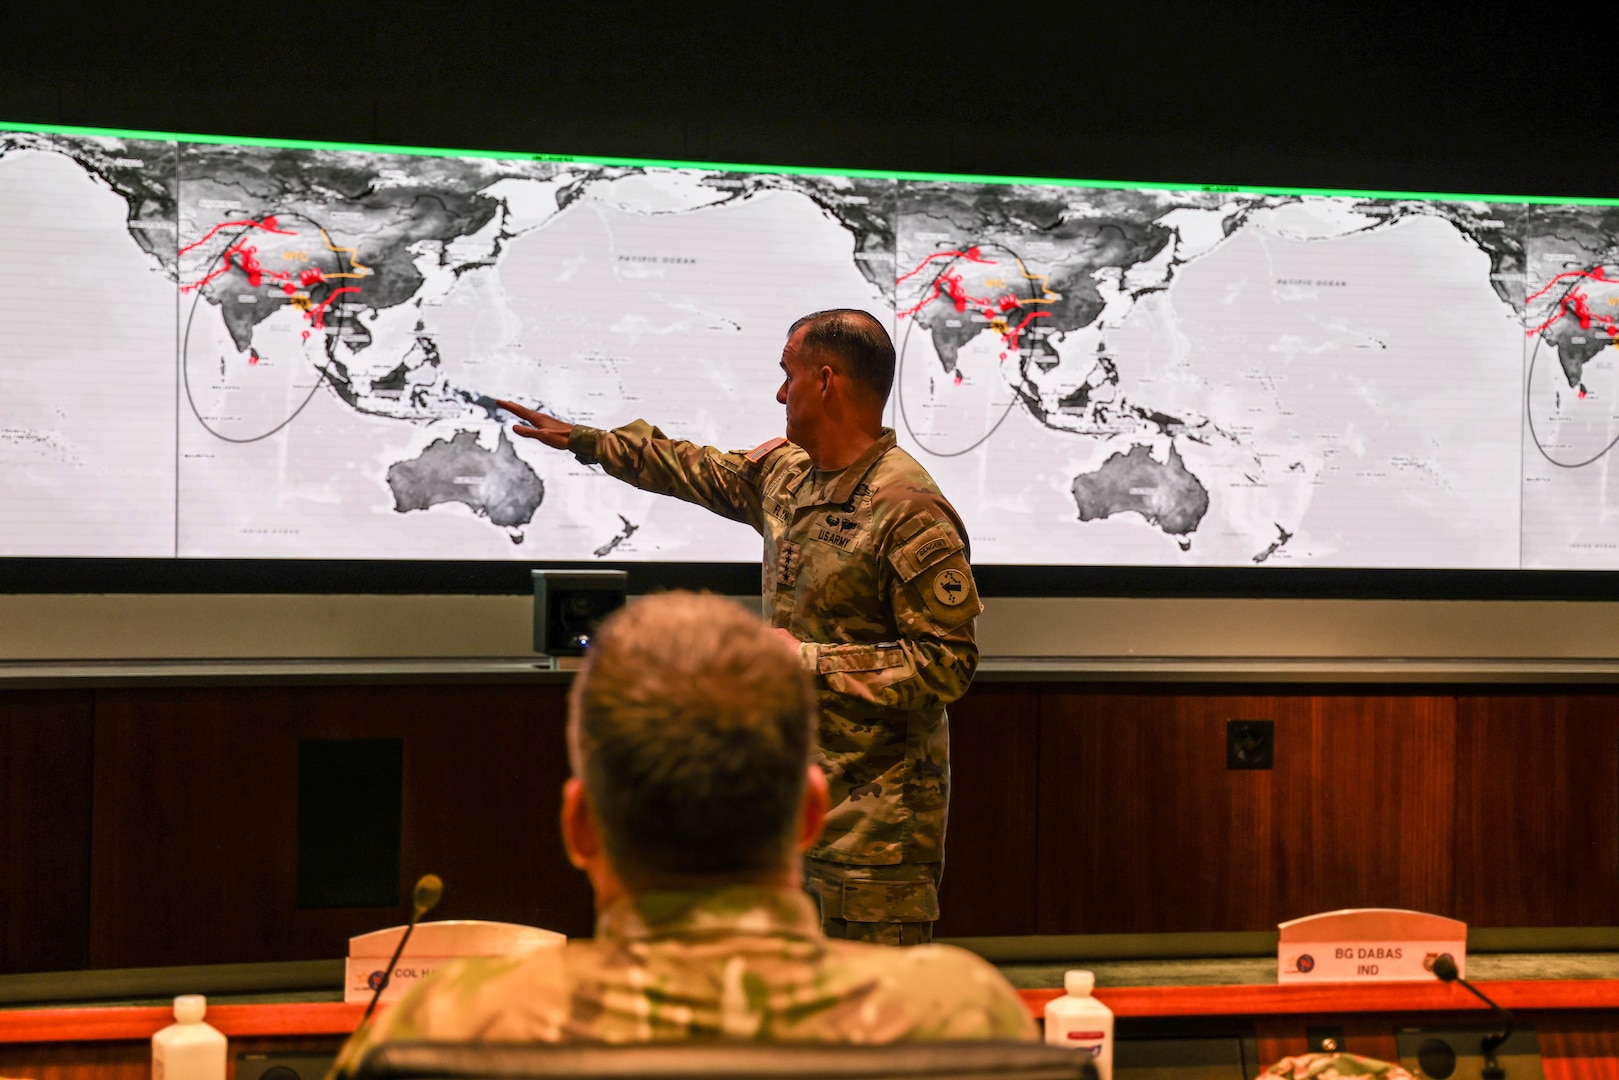 U.S. Army Pacific Commanding General Charles A. Flynn gives his opening remarks during the International Fellows visit on Fort Shafter, HI. Feb. 21, 2024. The International Fellows are instructed in areas ranging from military concepts and doctrine to national and theater level strategies. (U.S. Army photo by Spc. Taylor Gray)